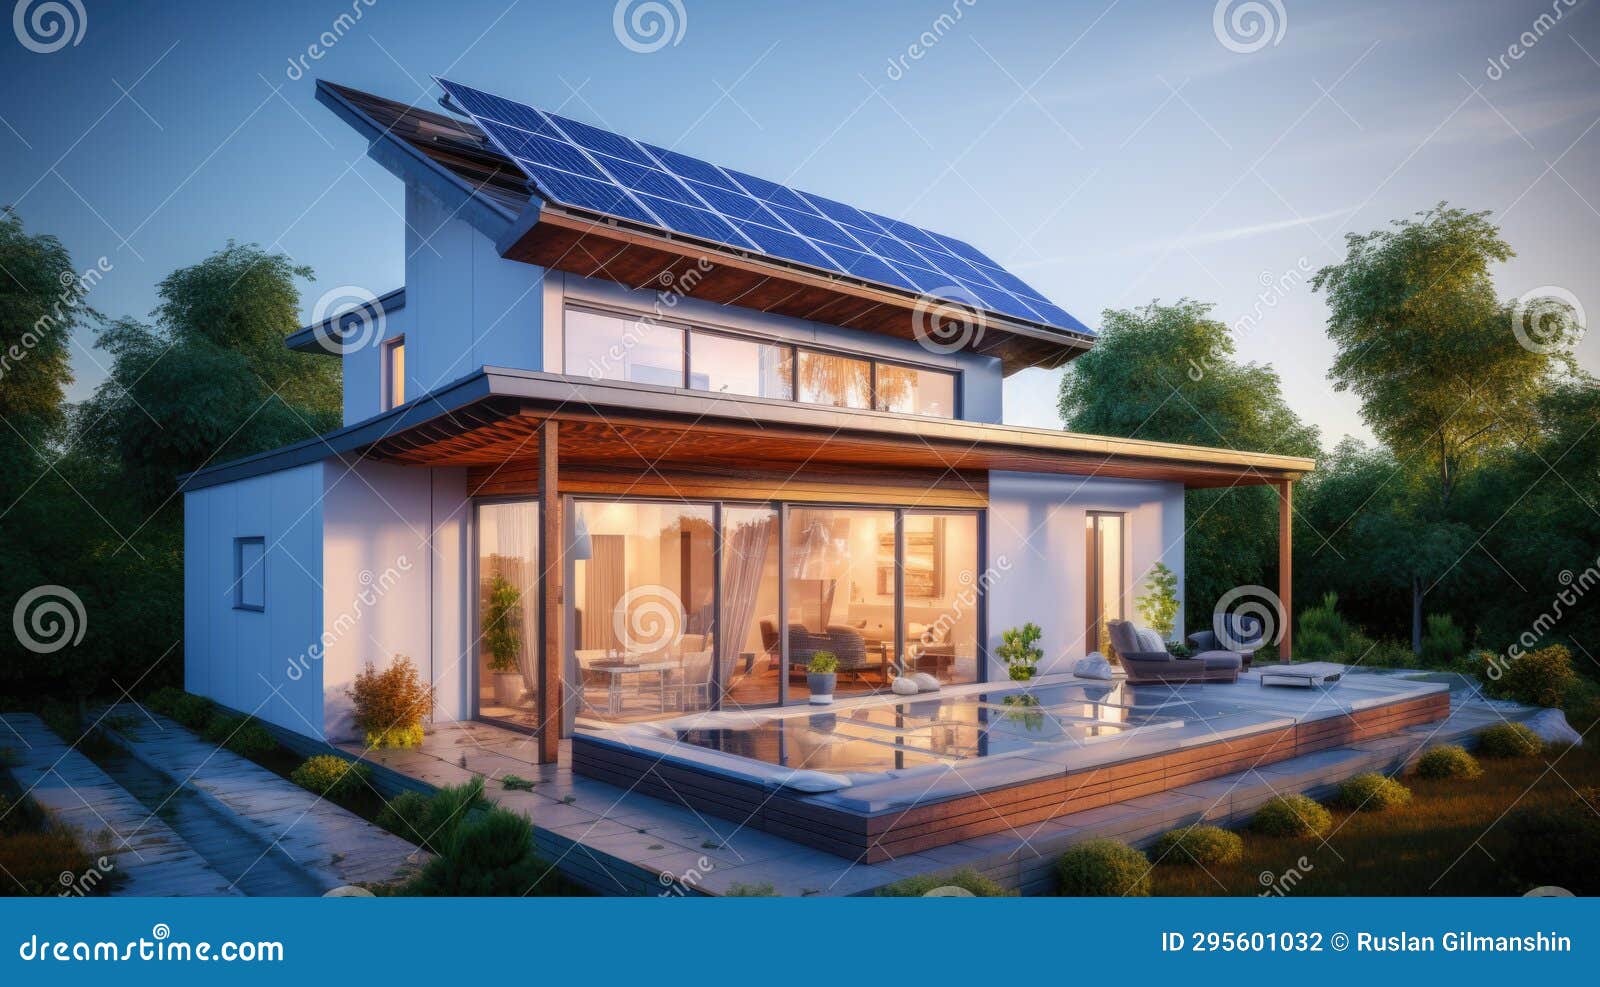 modern energy-efficient house with solar panels on the roof